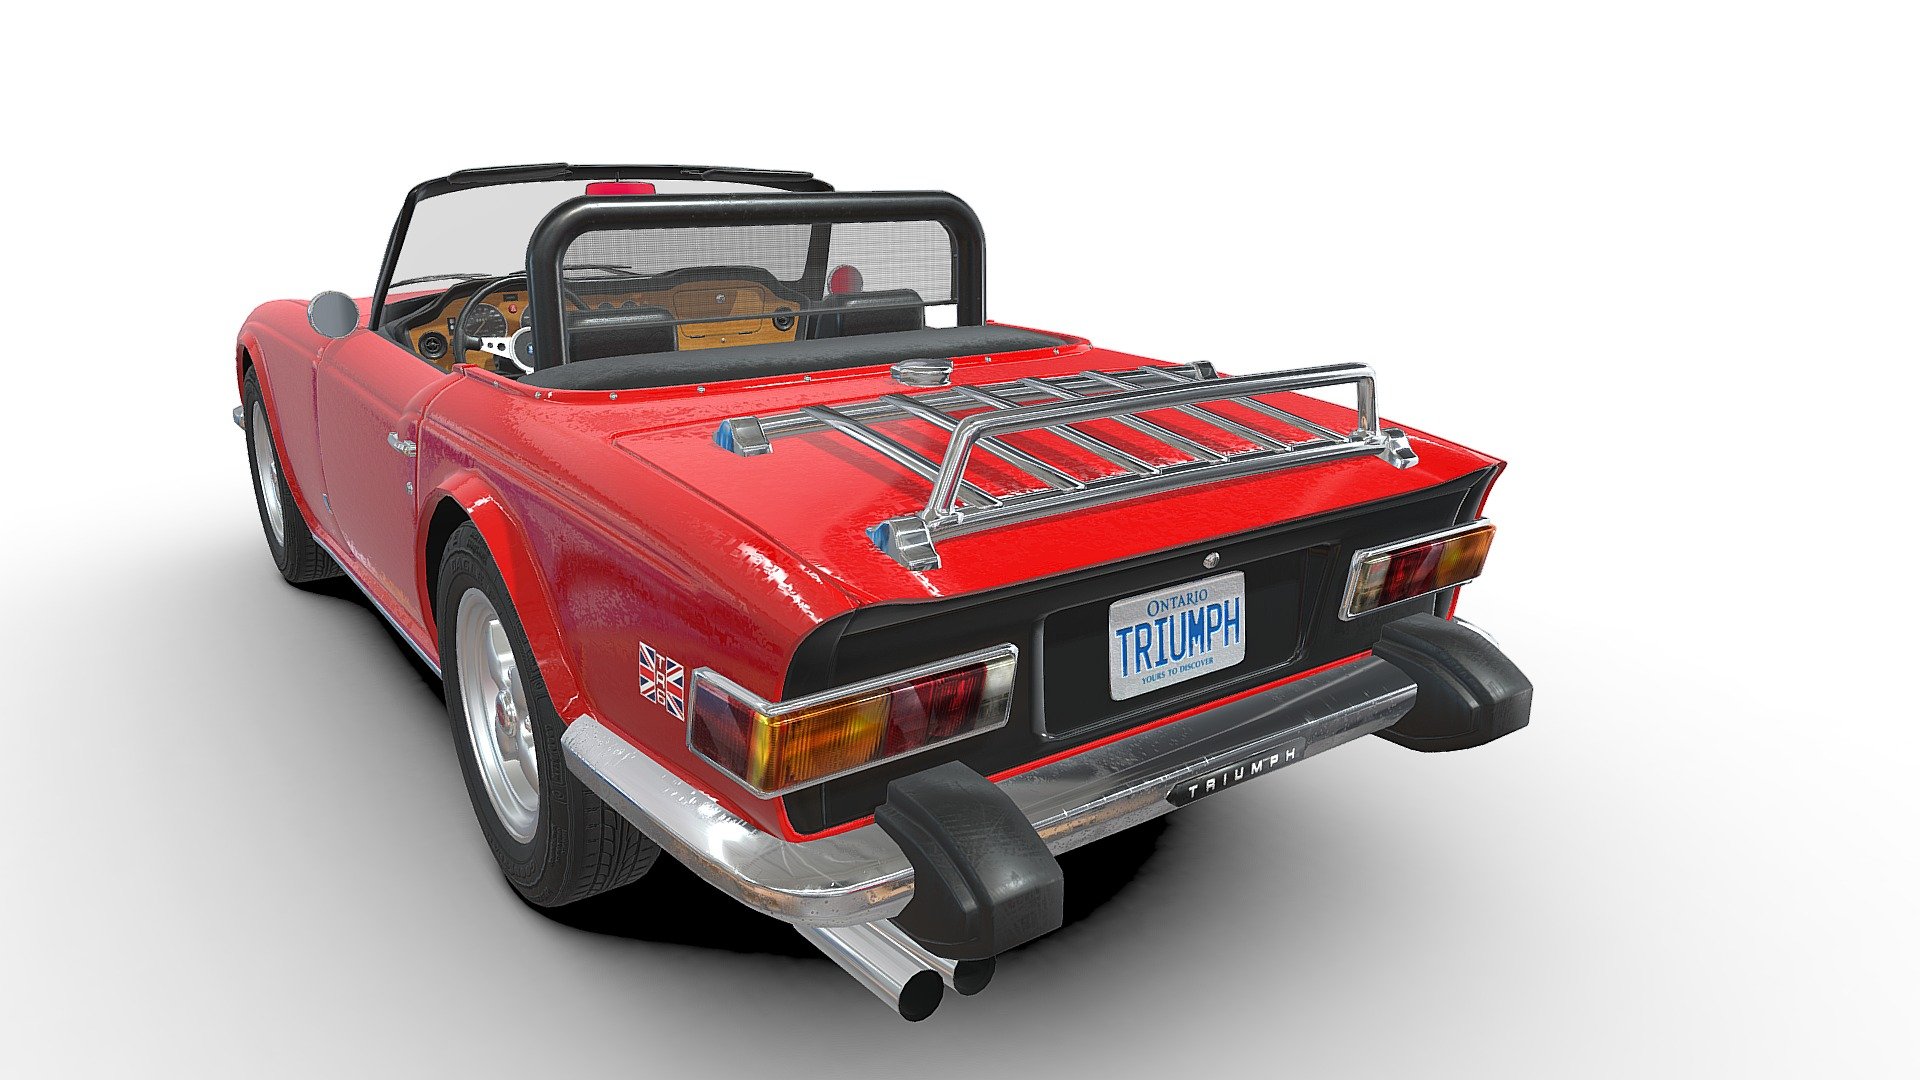 MODEL MADE FROM CLIENTS REFERENCE (Bring a Trailer auction)

Detailed model of a 1975 TR6. 

Polycount : 100k Tris.

Modelled in Blender and Textured in Substance Painter.

Please credit me if you use it :) - 1975 Triumph TR6 - Download Free 3D model by rickymovement 3d model